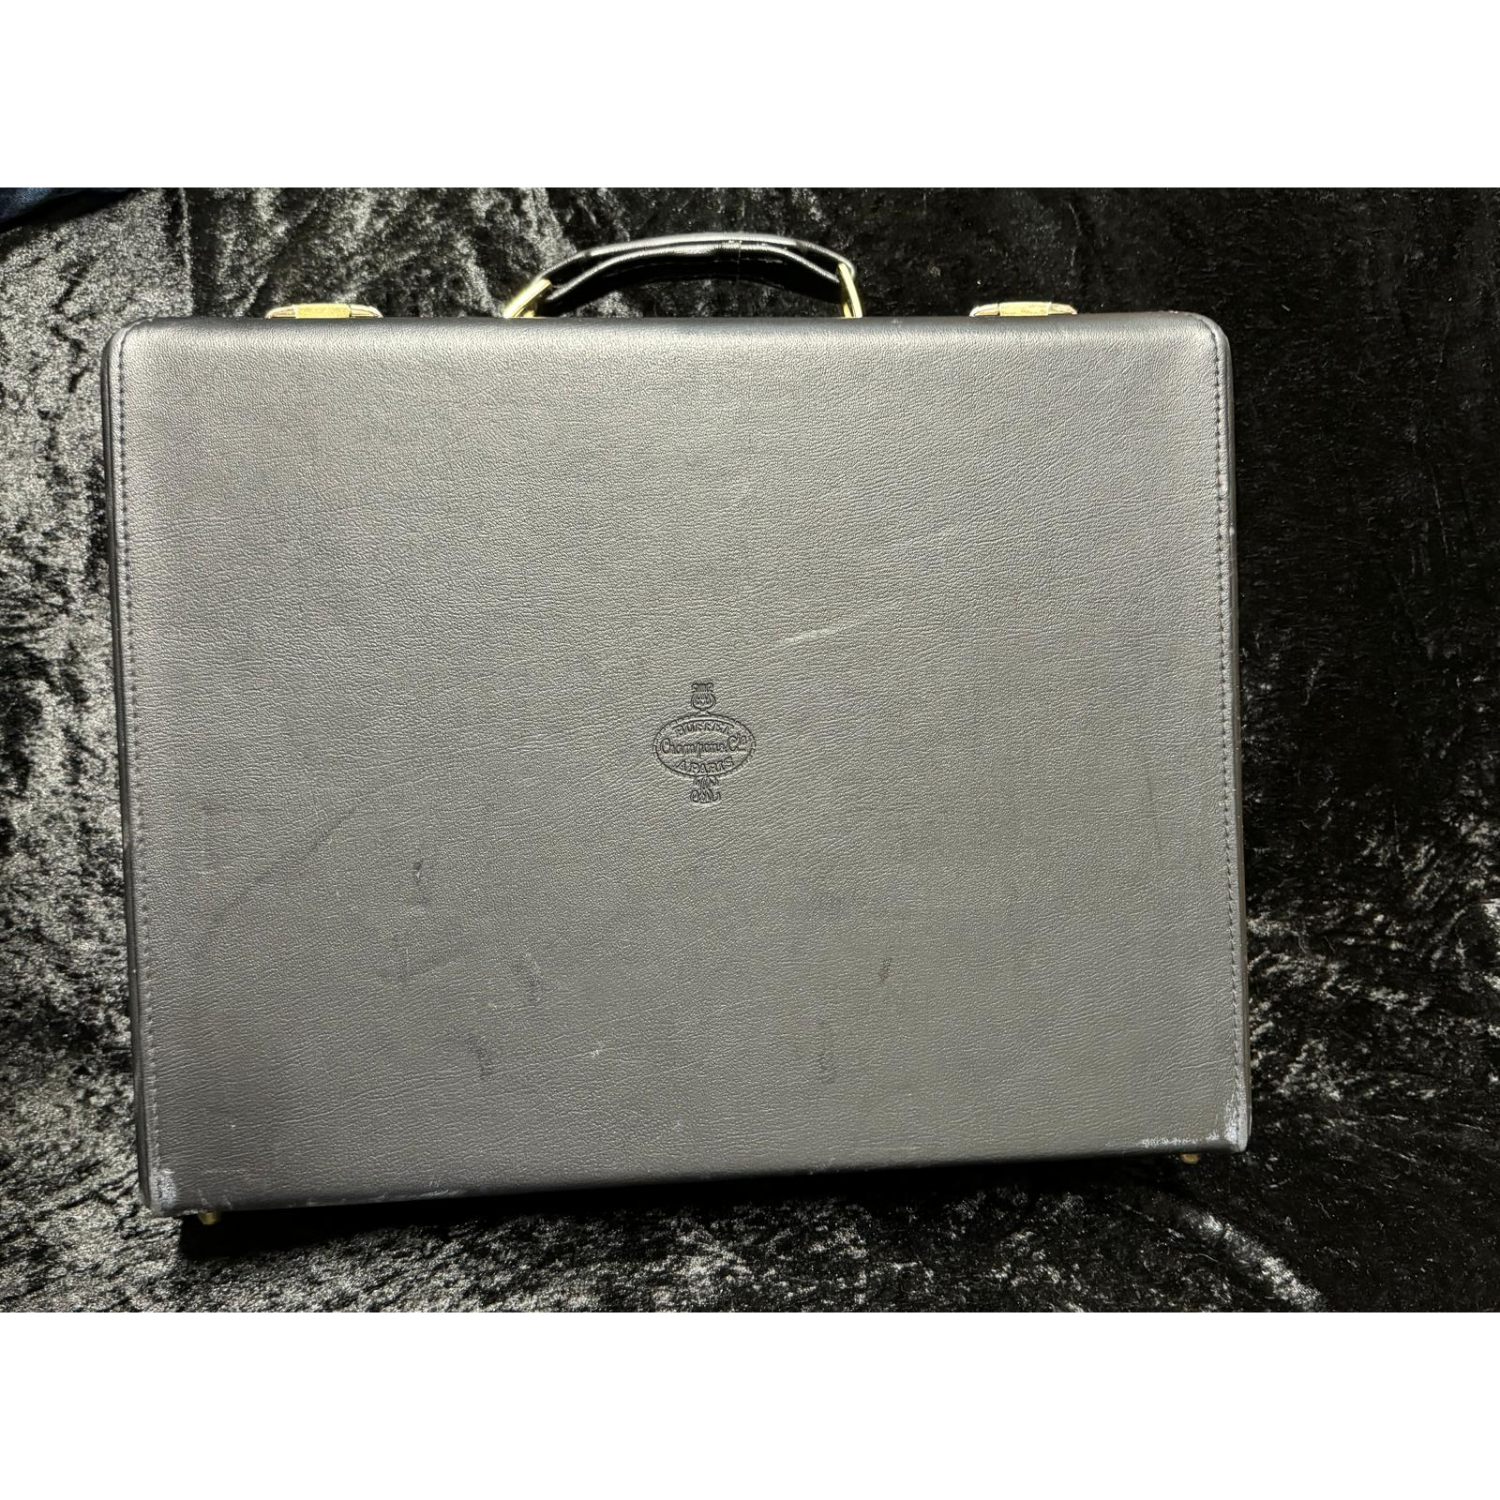 Exterior of Buffet attache style double case, with embossed Buffet logo